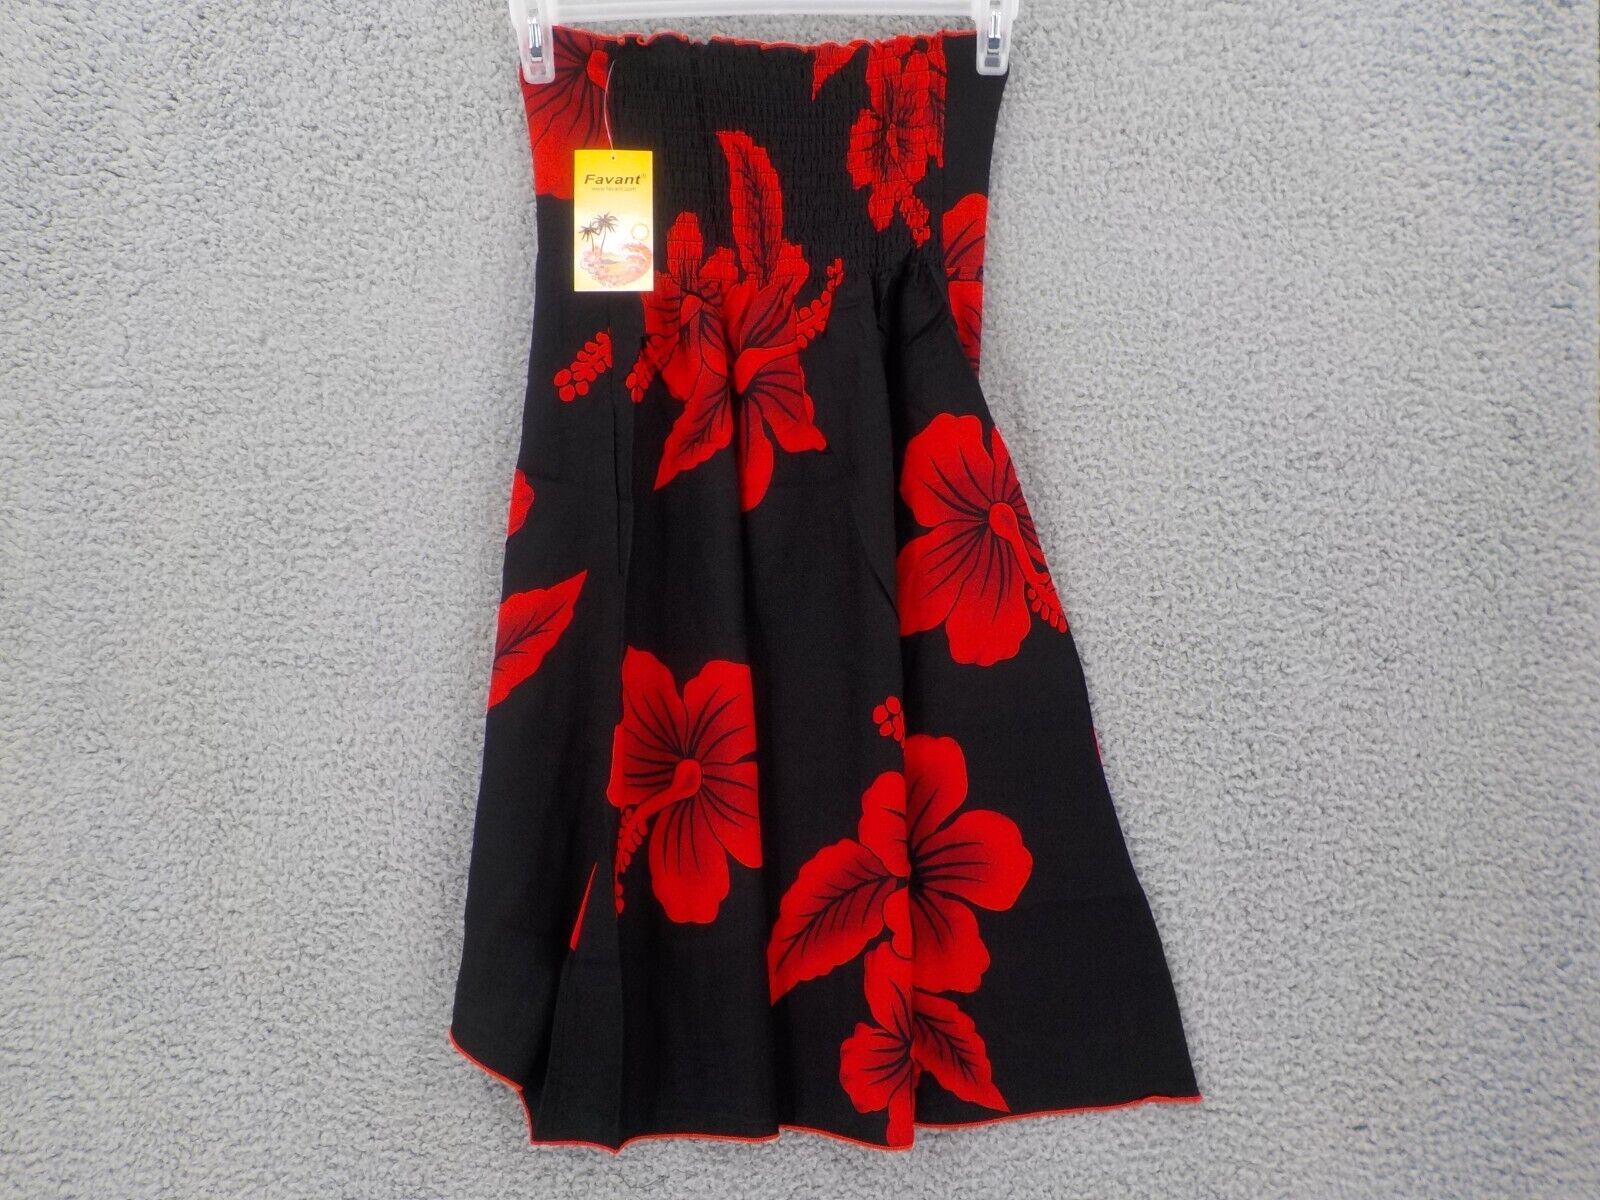 Primary image for Favant Girls Butterfly Dress SZ 12 Black with Red Hibiscus Elastic Front Bodice